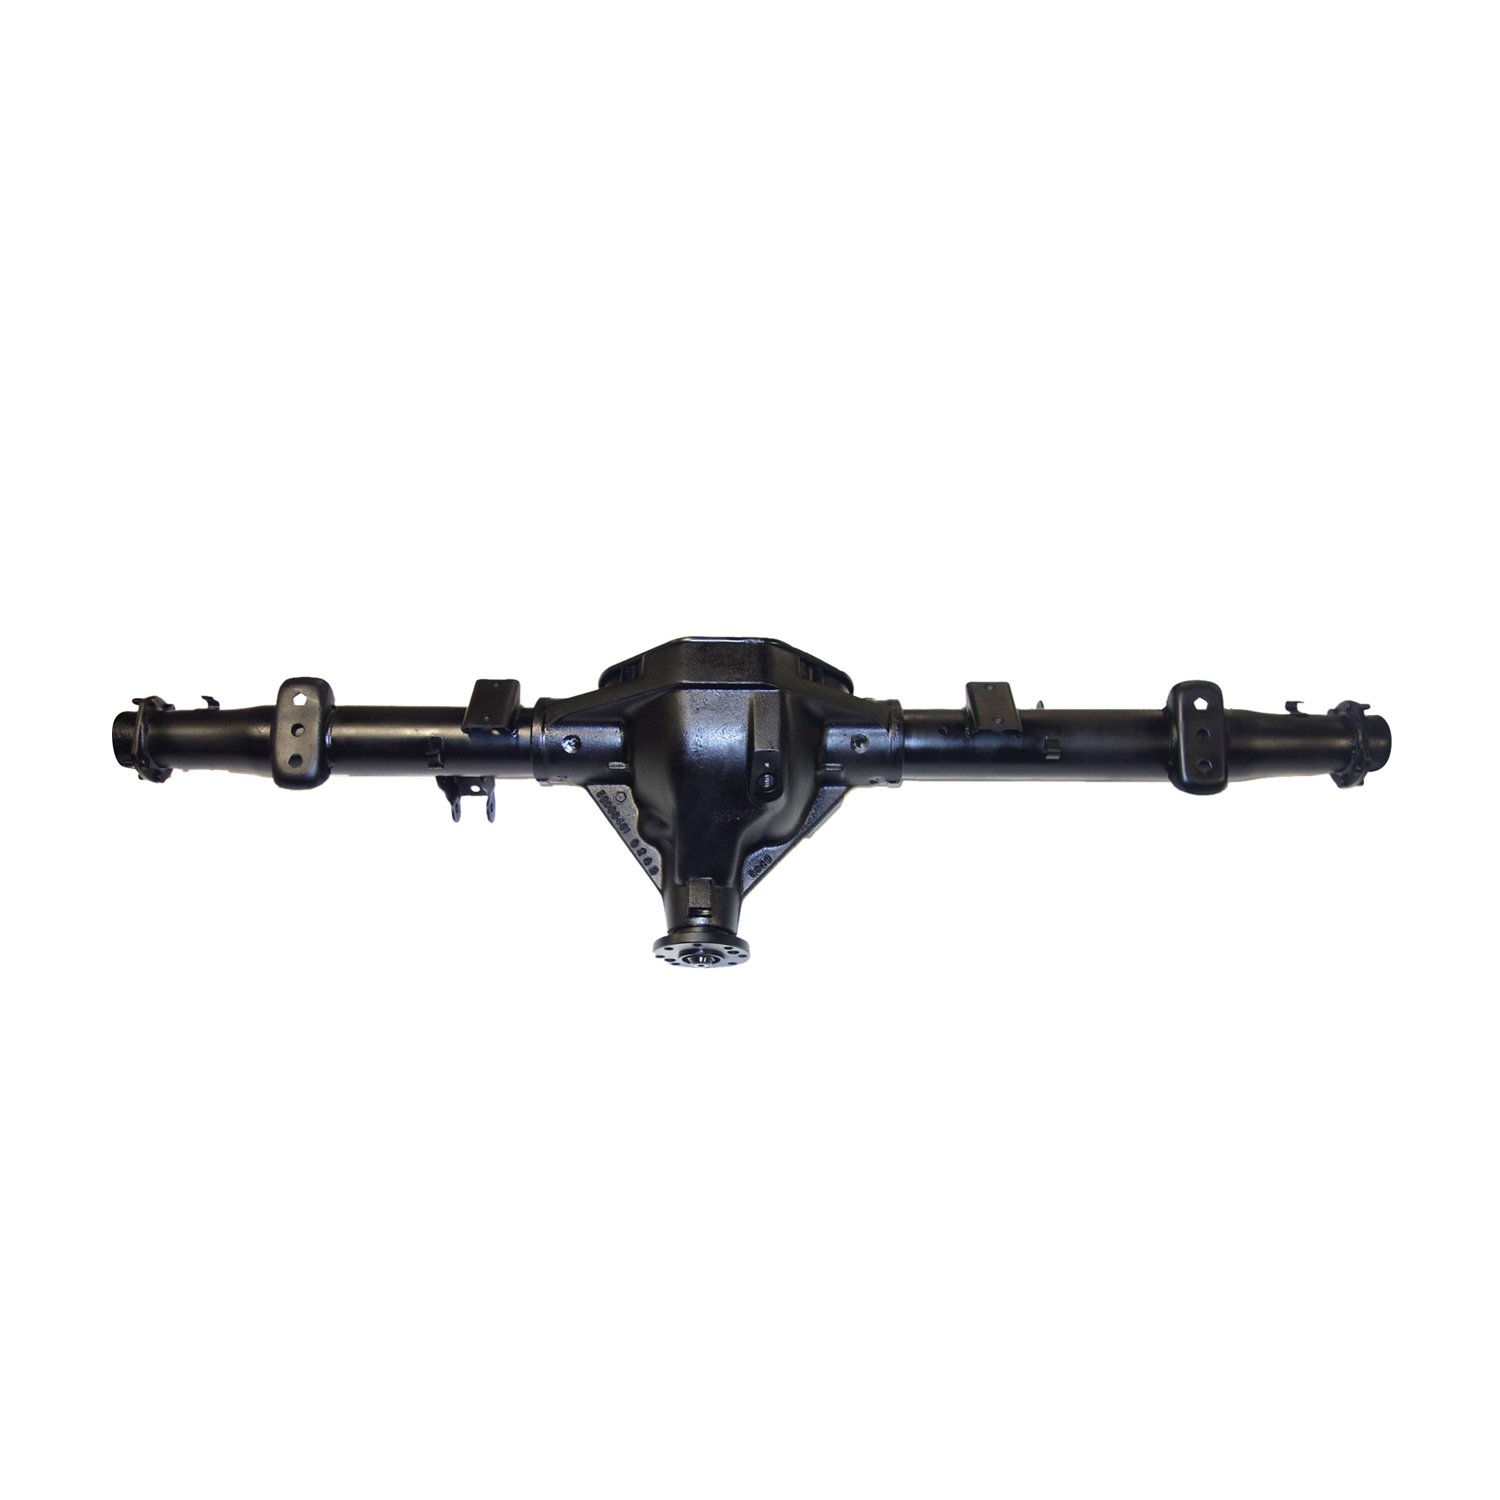 Remanufactured Axle Assy Chy 9.25" 2006 Durango 3.55 , 4x4 w/ Traction Control, Posi LSD